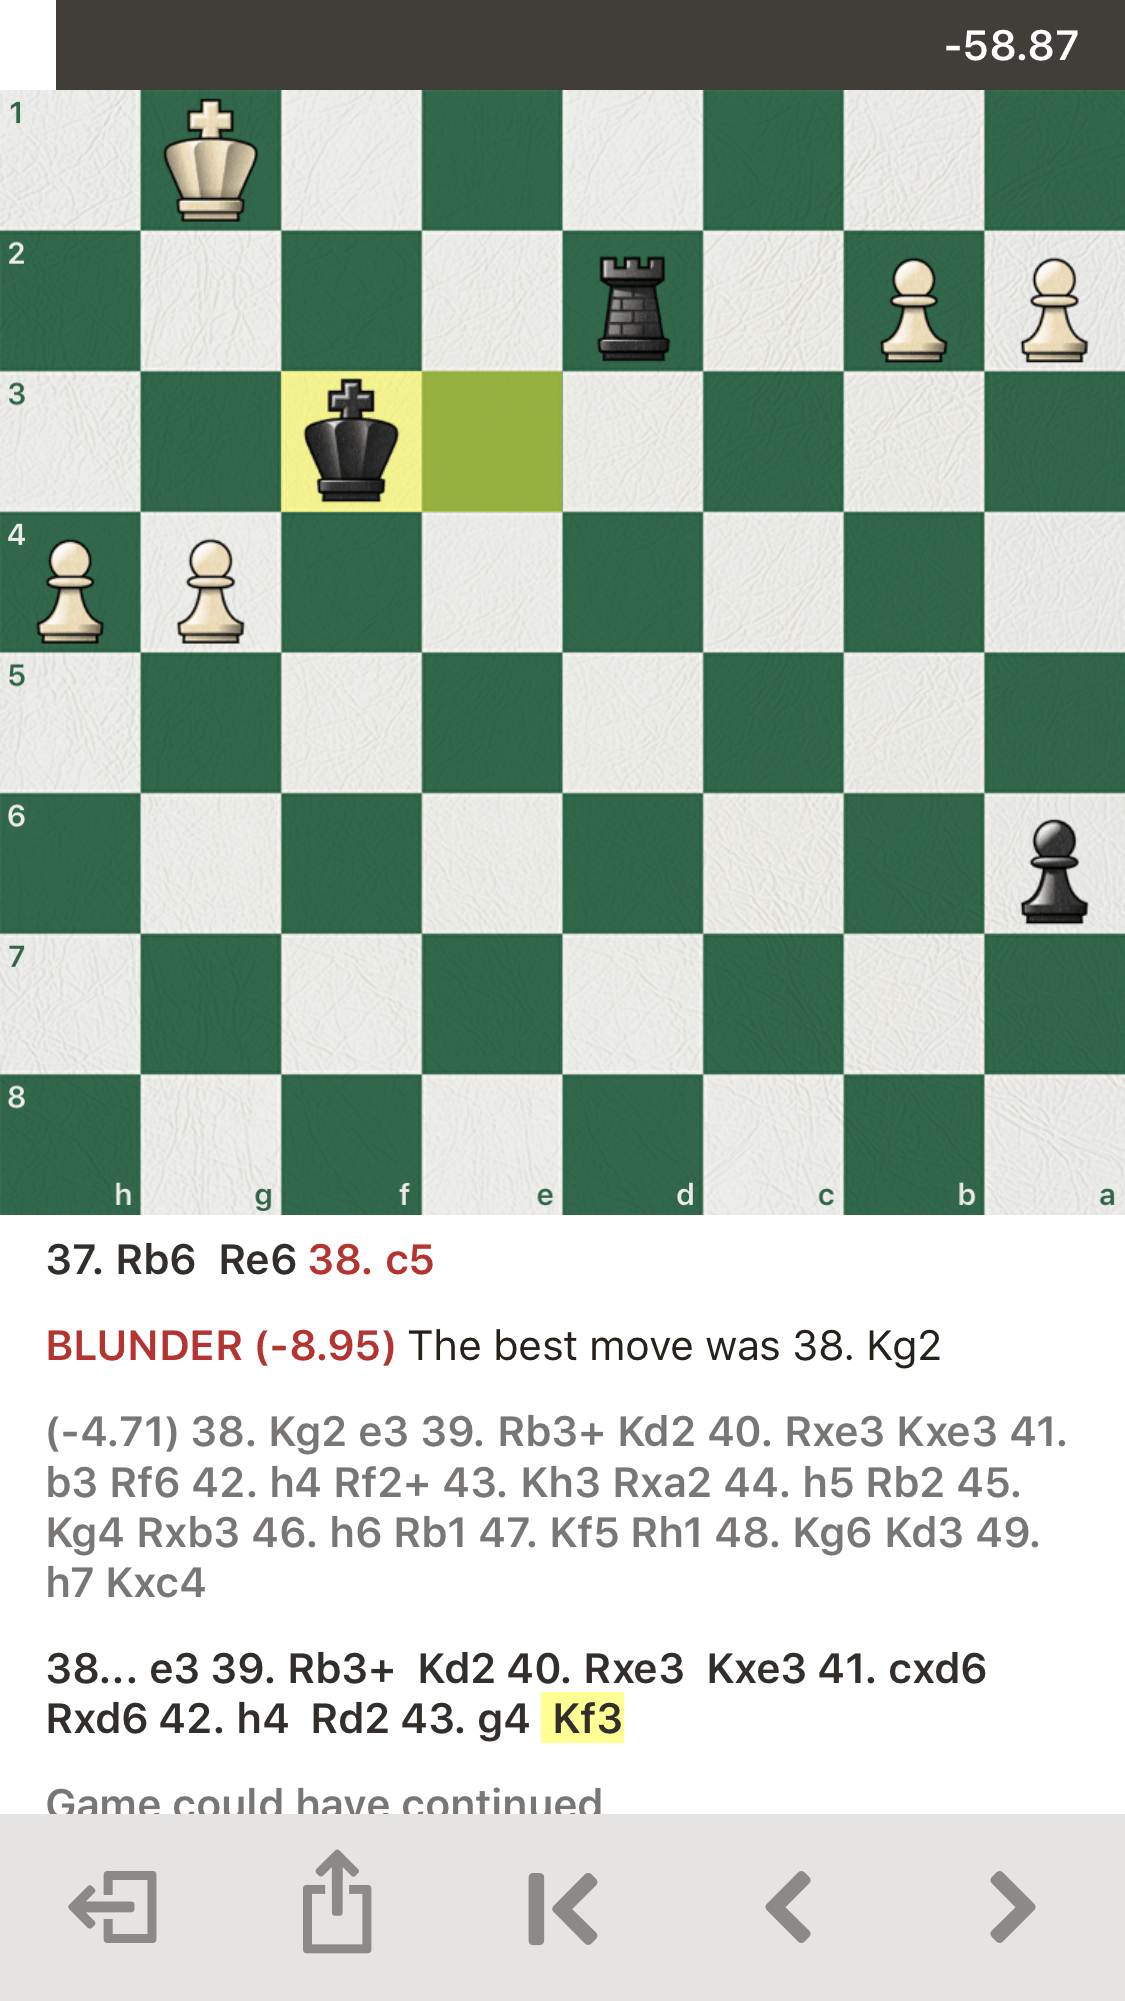 Suboptimal Move Suggestions in Game Review - Chess Forums 